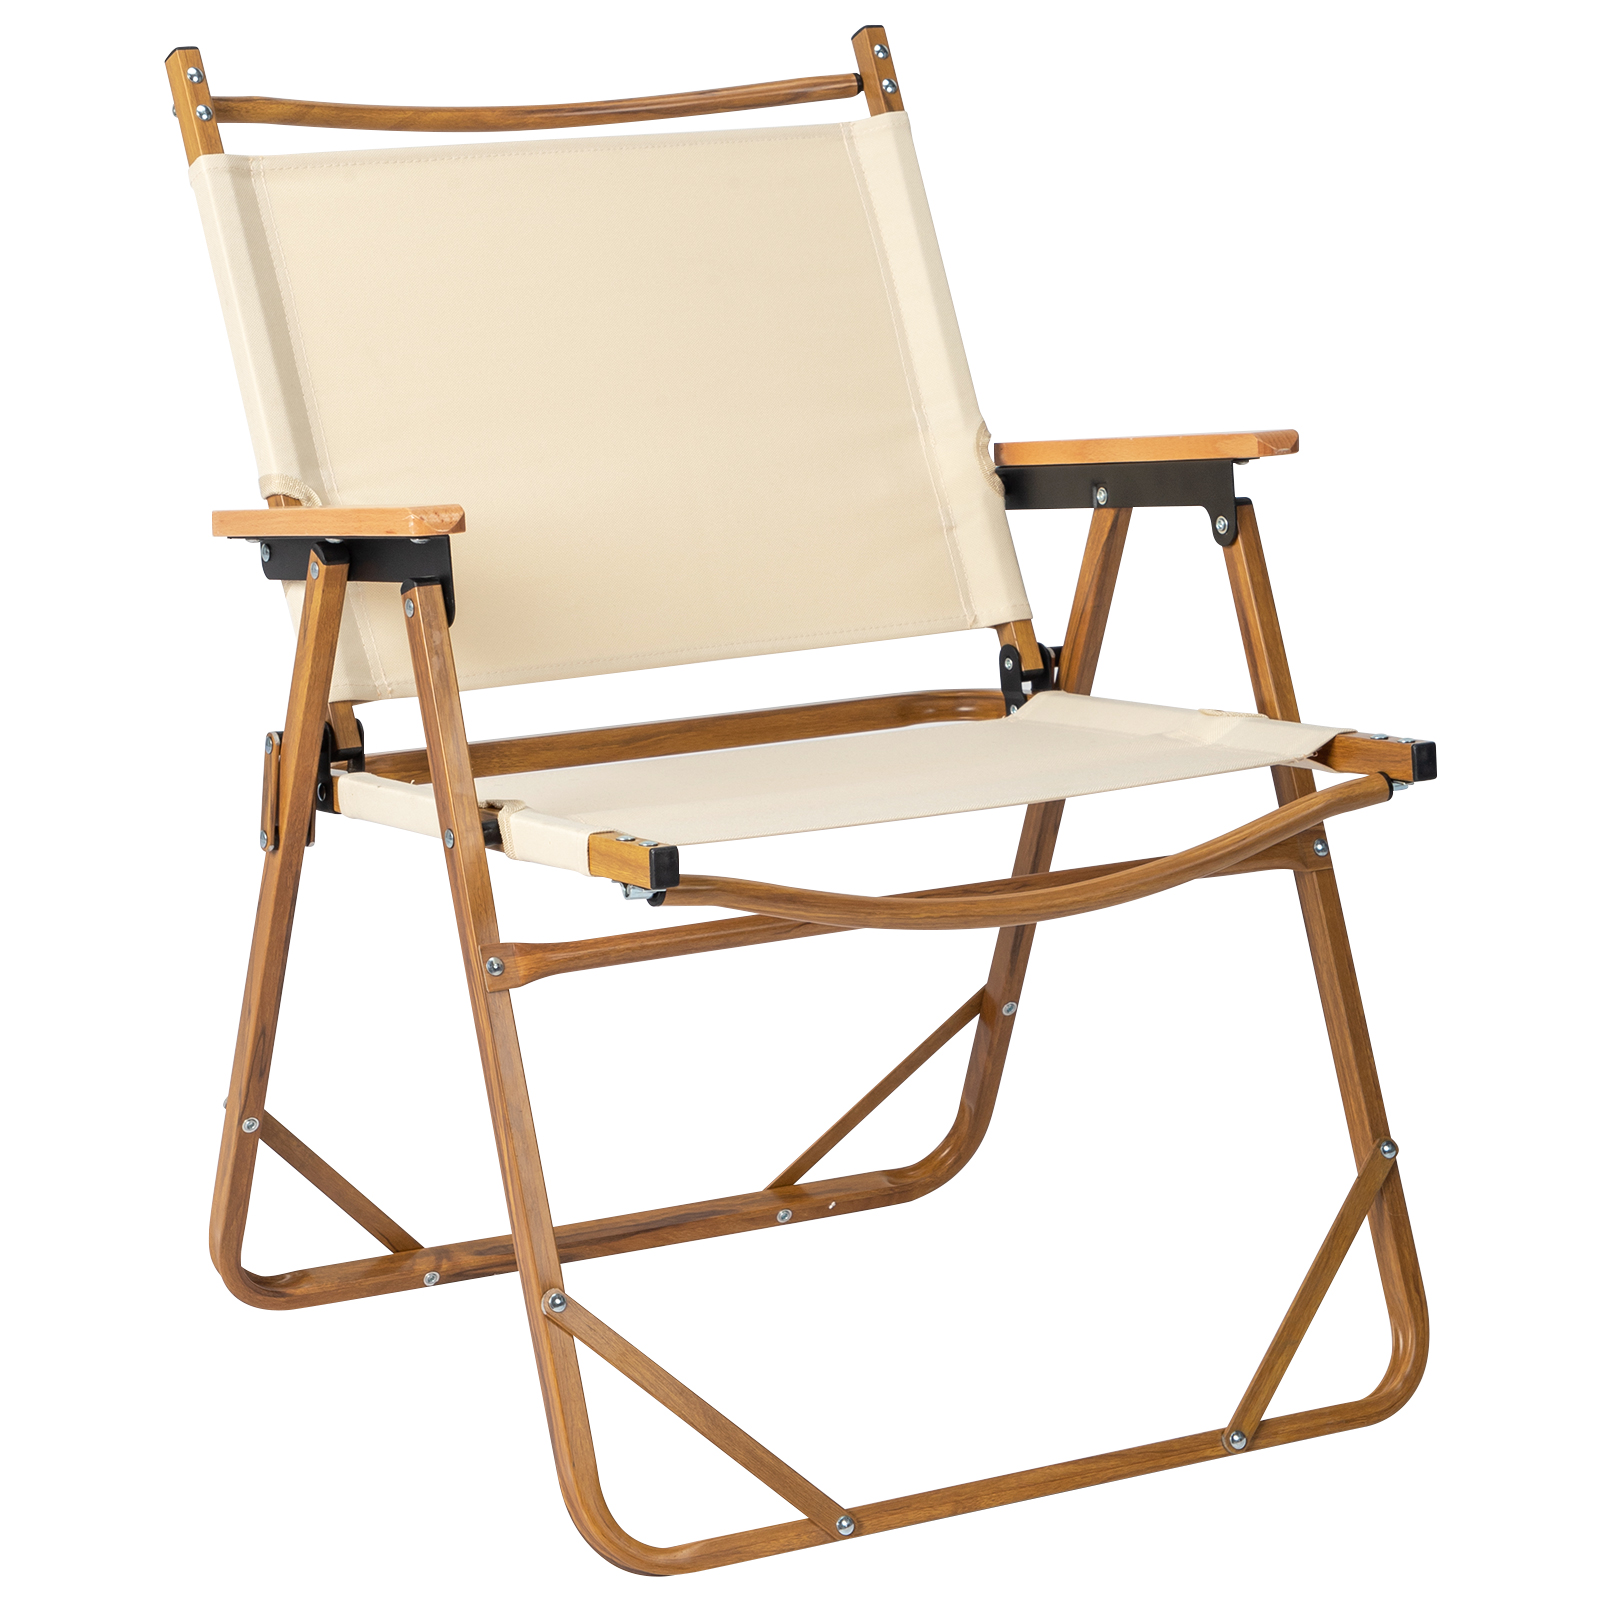 Winado Camping Chair Outdoors with Versatile Sports Chair, Outdoor Chair & Lawn Chair Beige - image 1 of 8